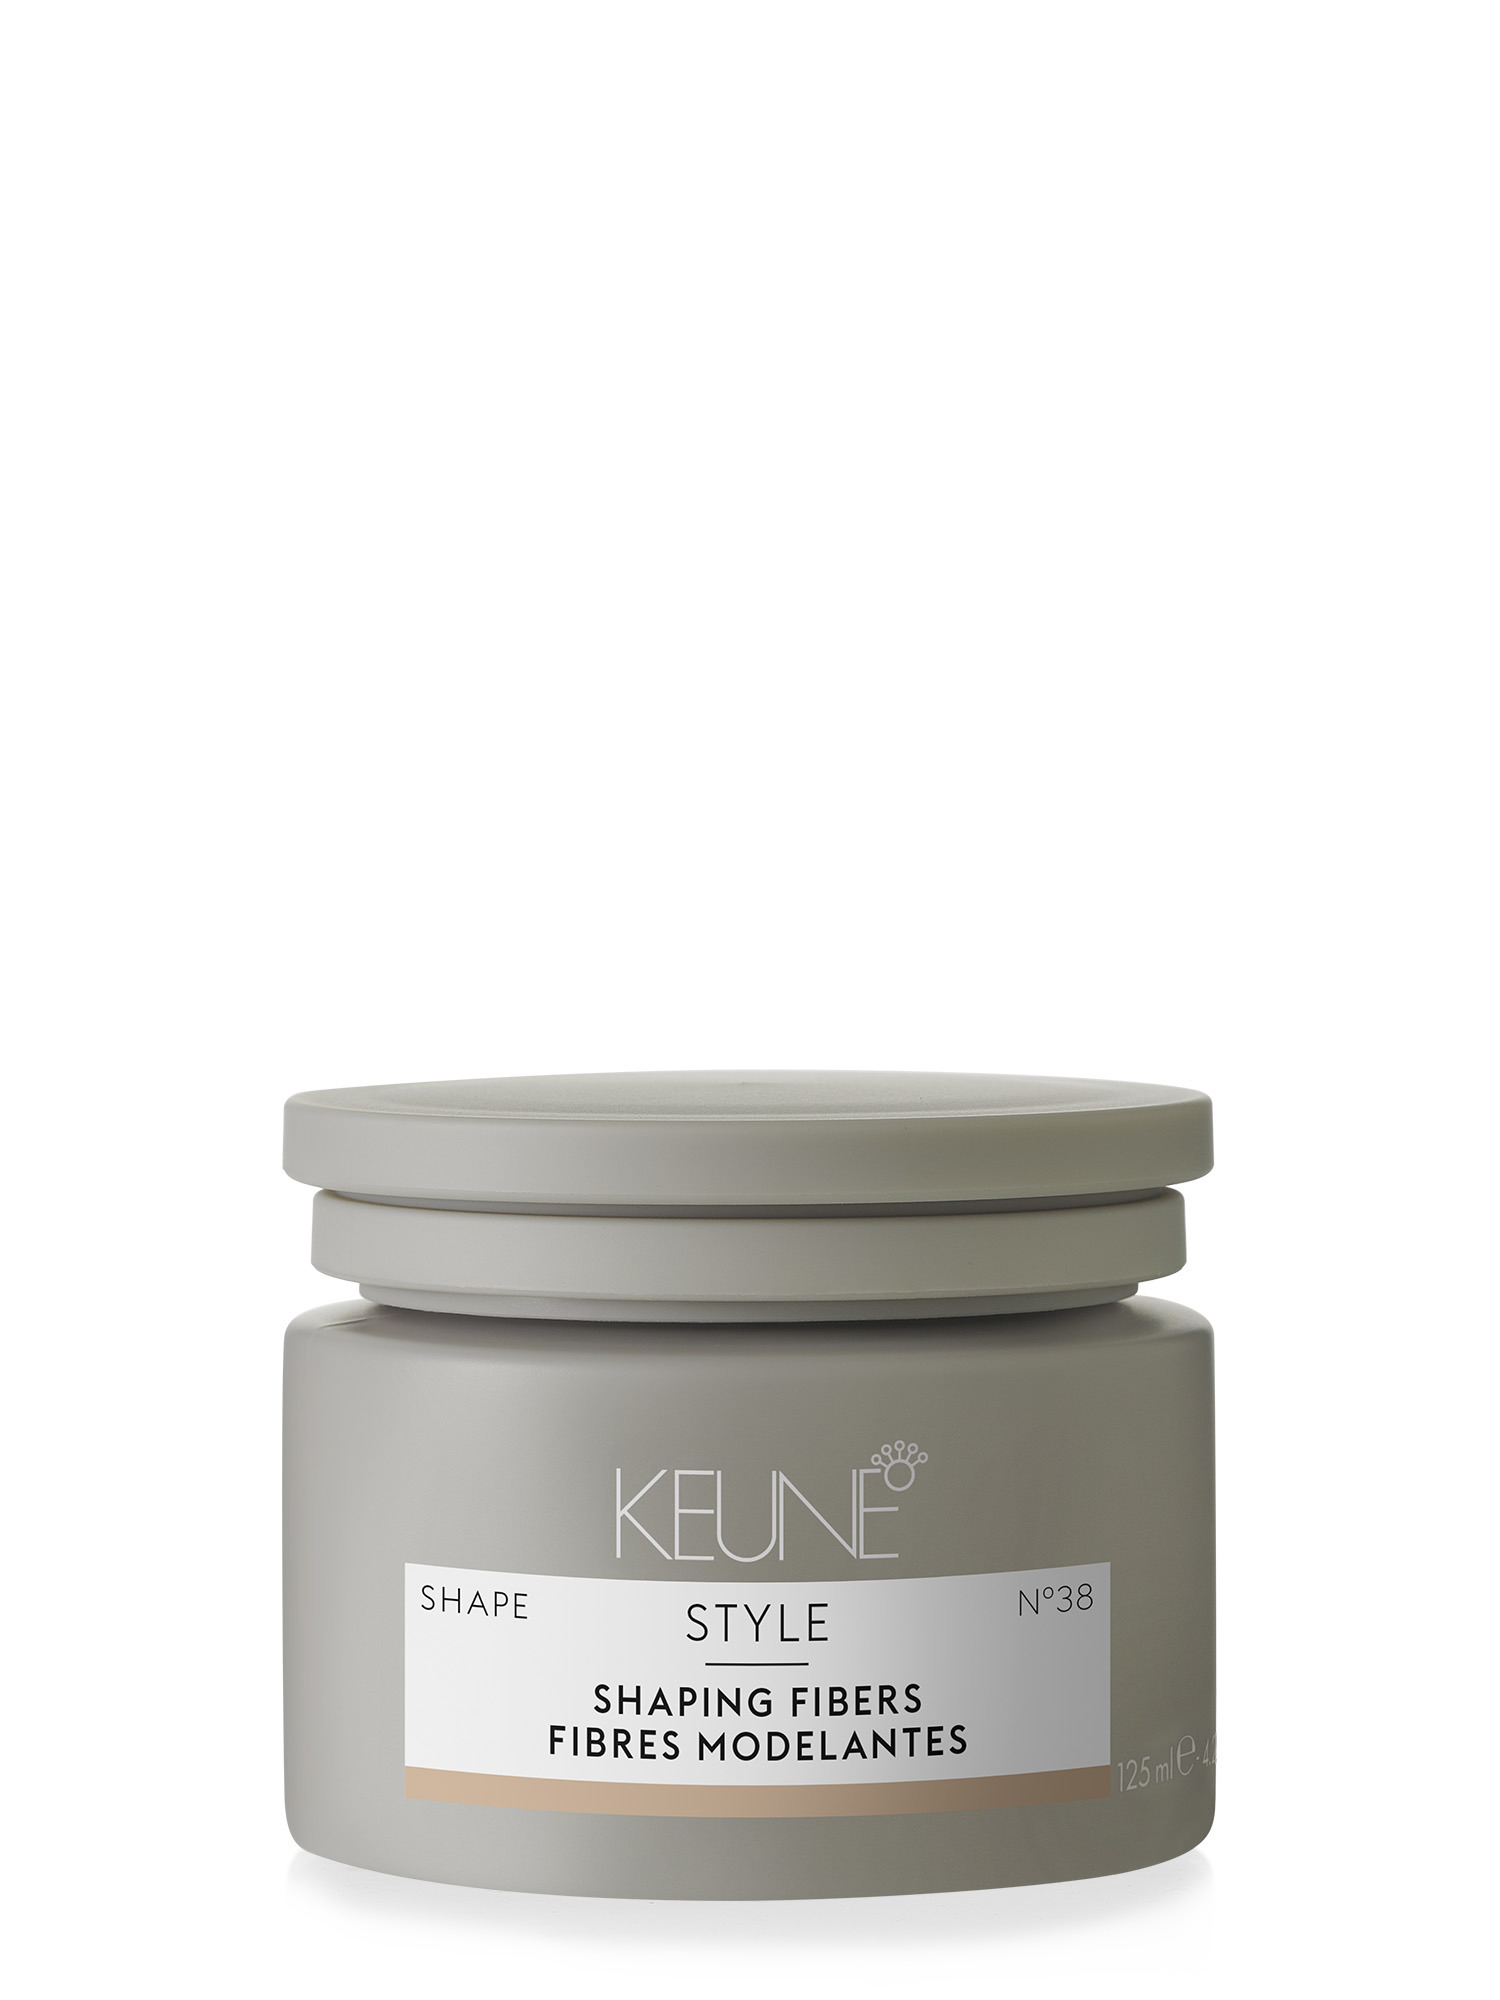 STYLE SHAPING FIBERS: Fiber pomade for flexible hold, strong shine, and anti-frizz action. Adds extra texture without weighing down the hair. Discover it now on keune.ch!